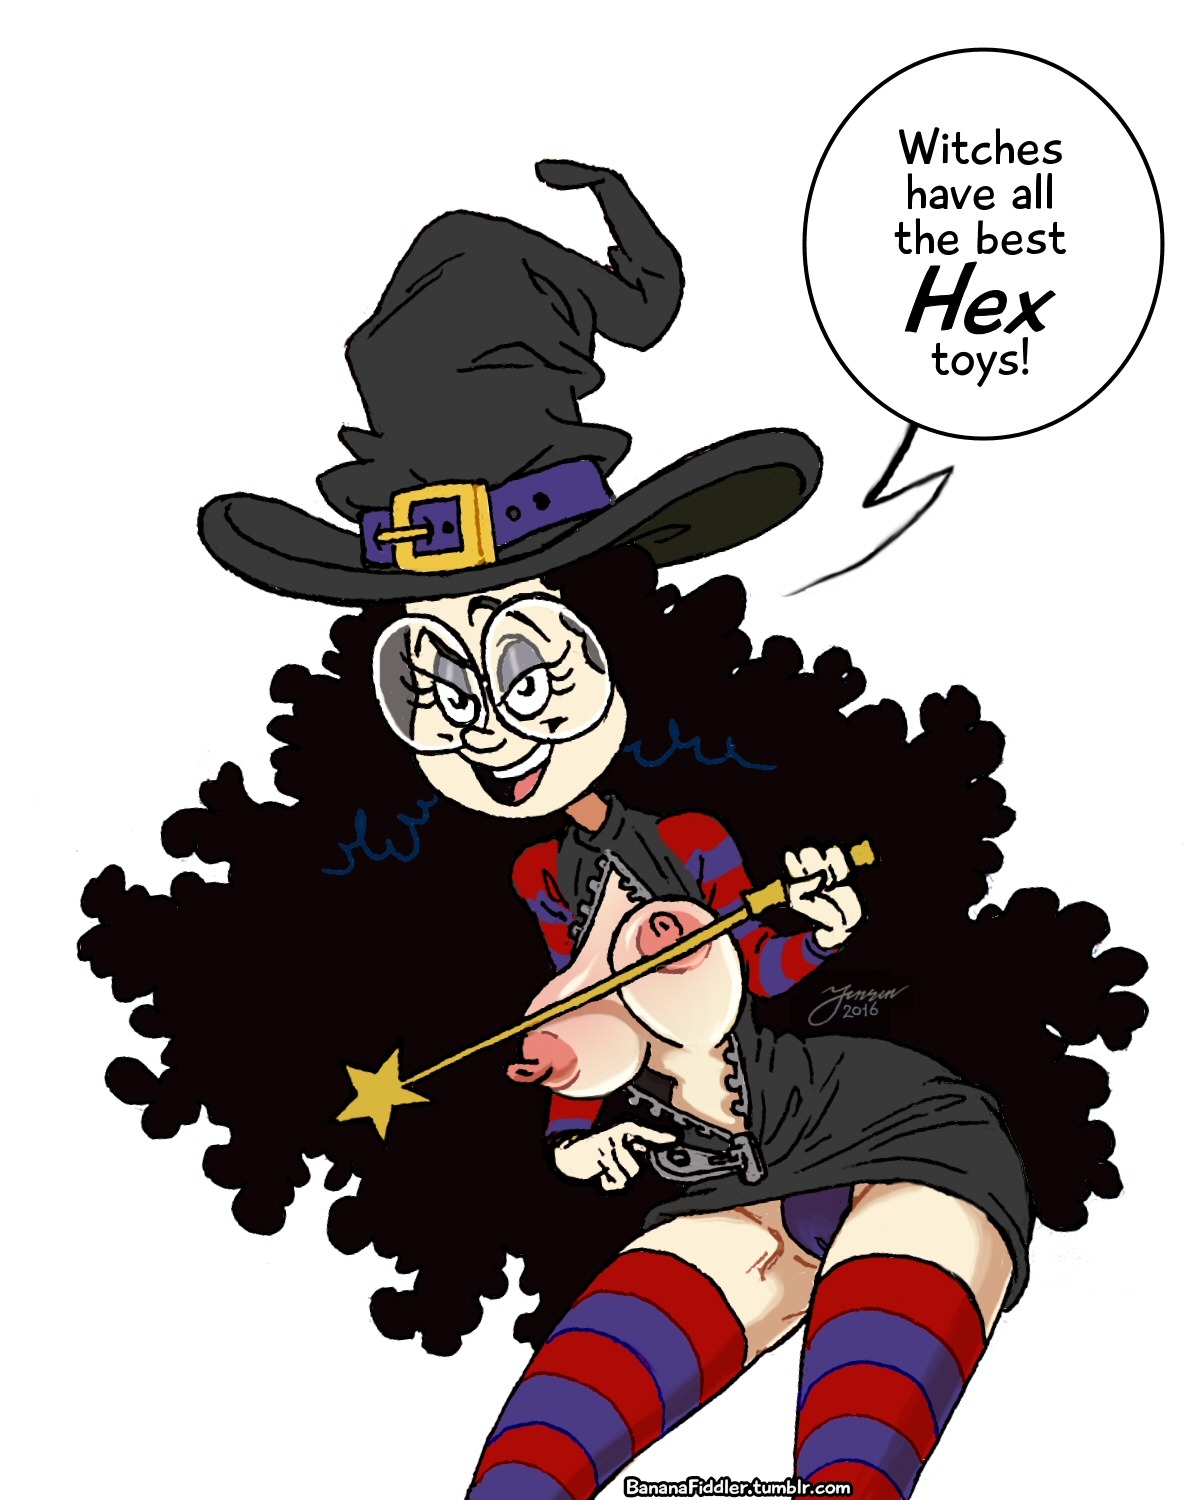 bananafiddler:  Hey Zaribot, did you pick a name for your witch OC, yet? If not,